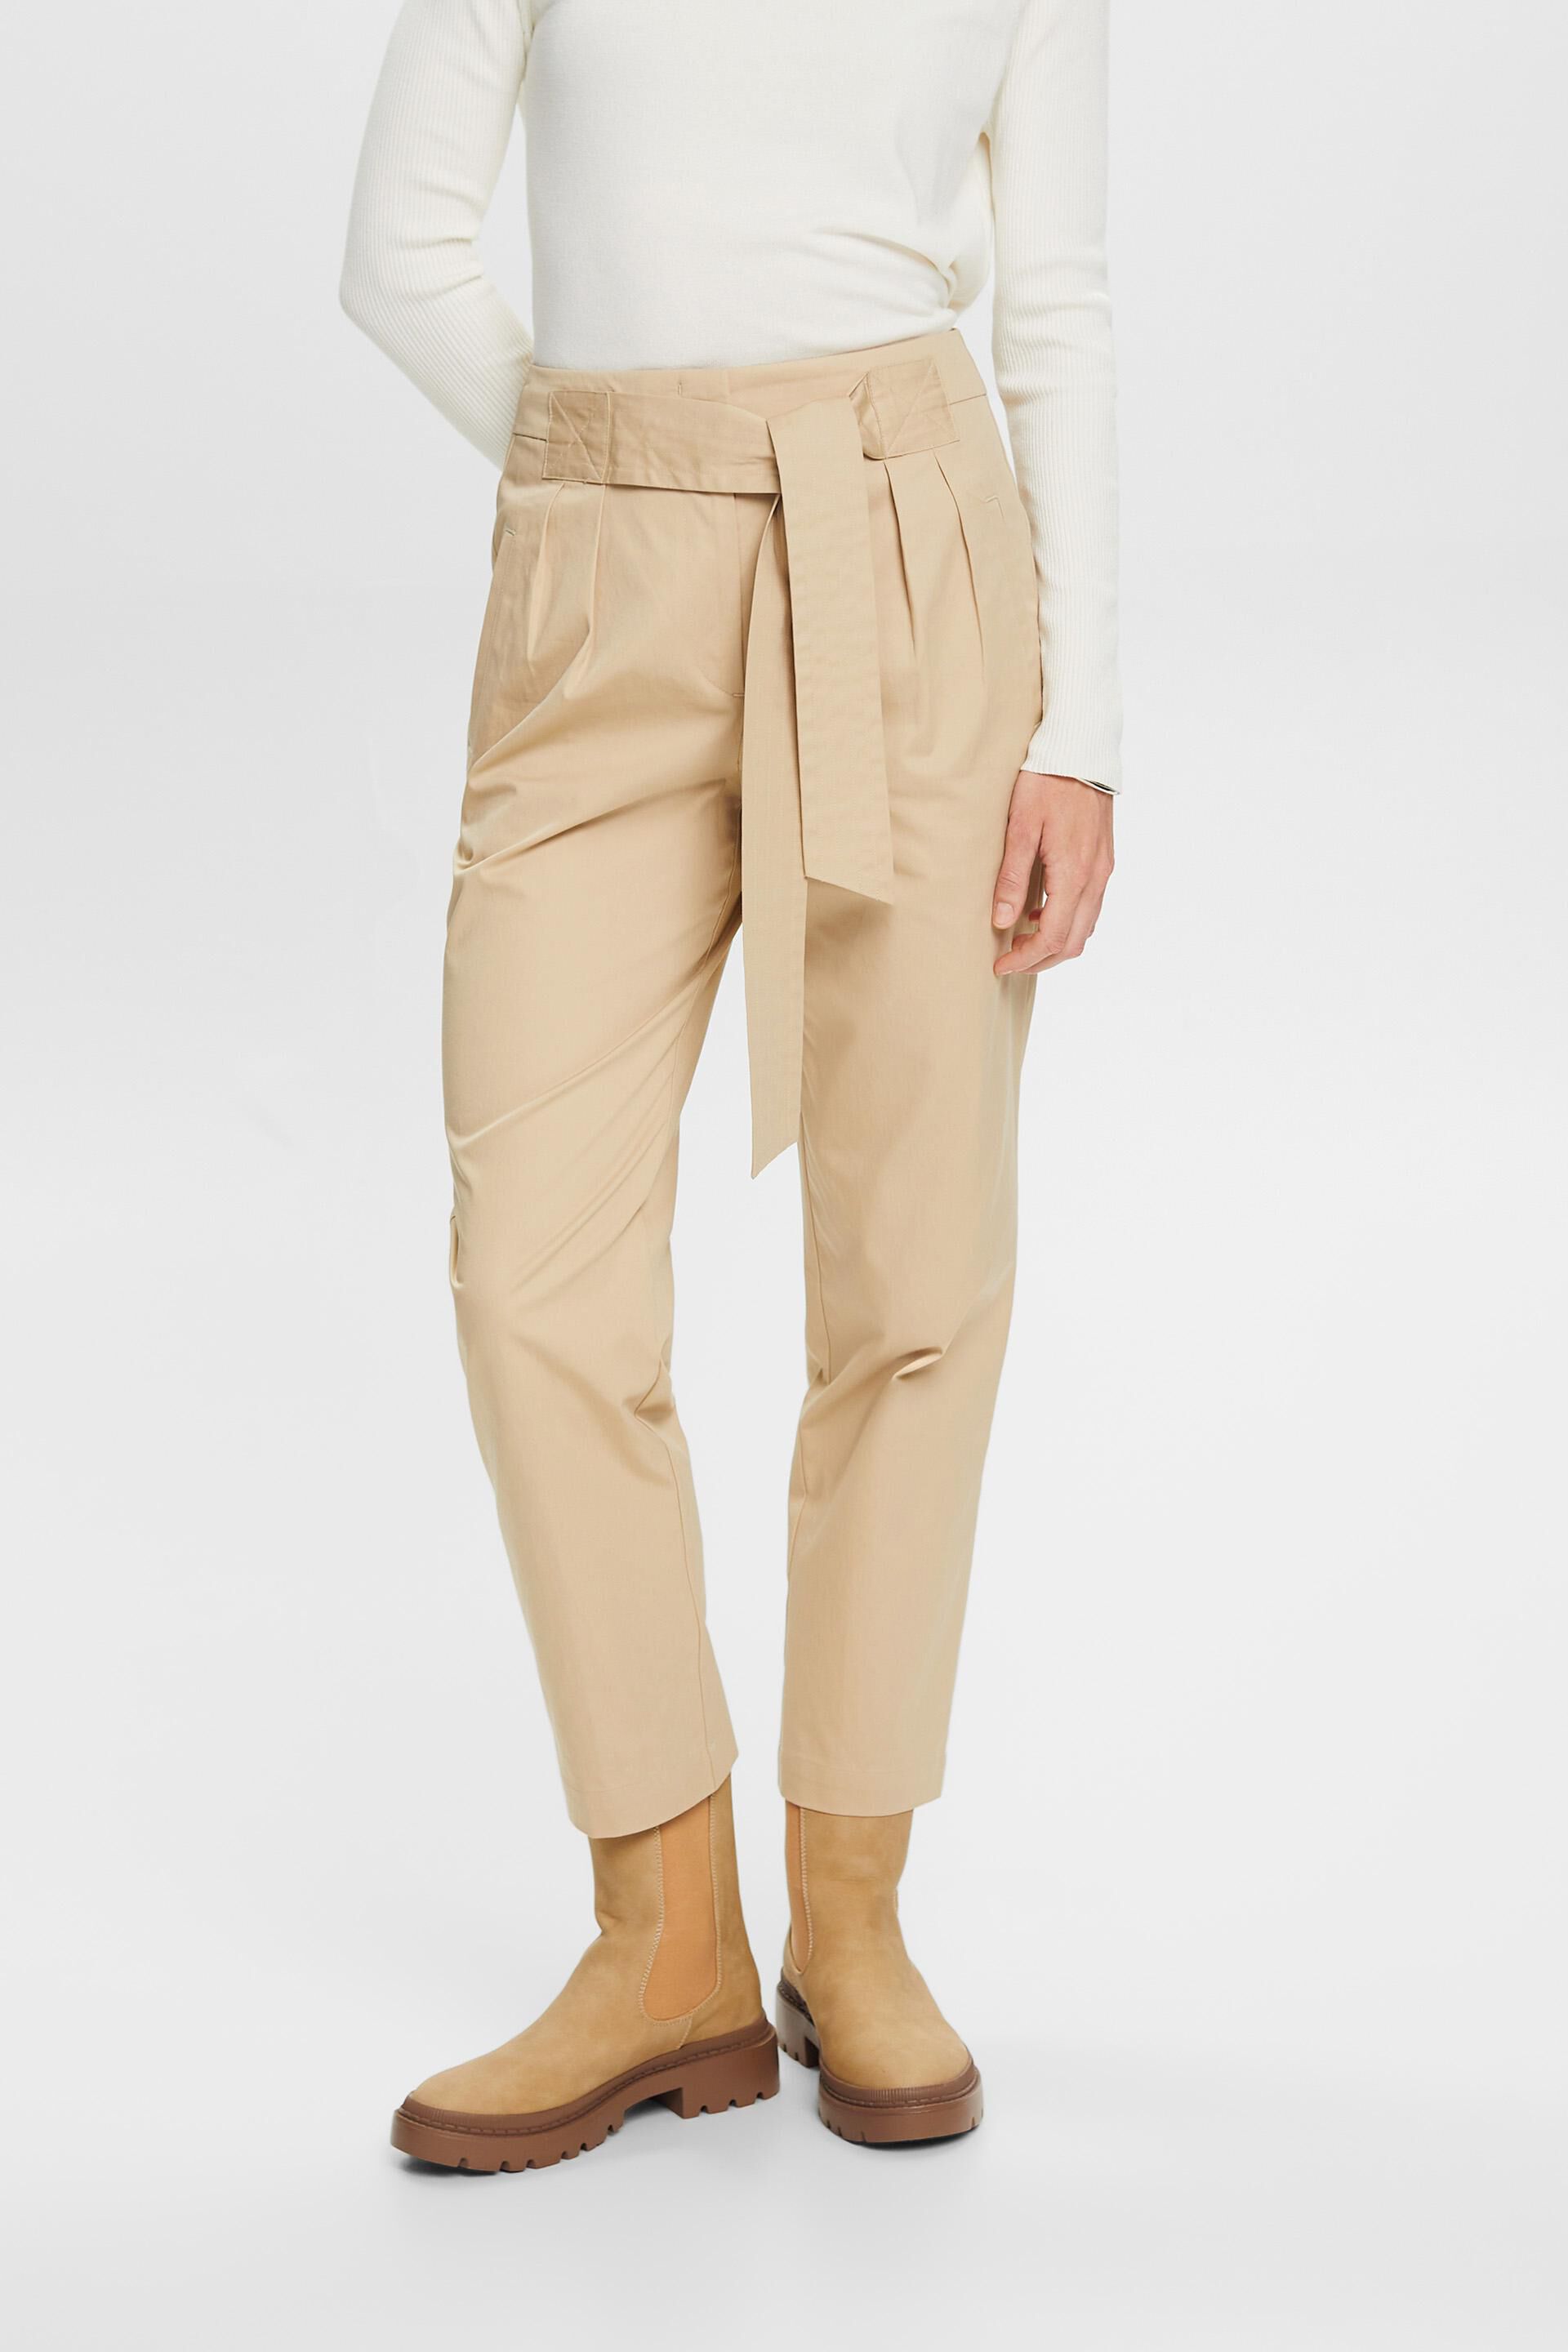 Esprit trousers tie fixed 100% cotton belt, with a Chino